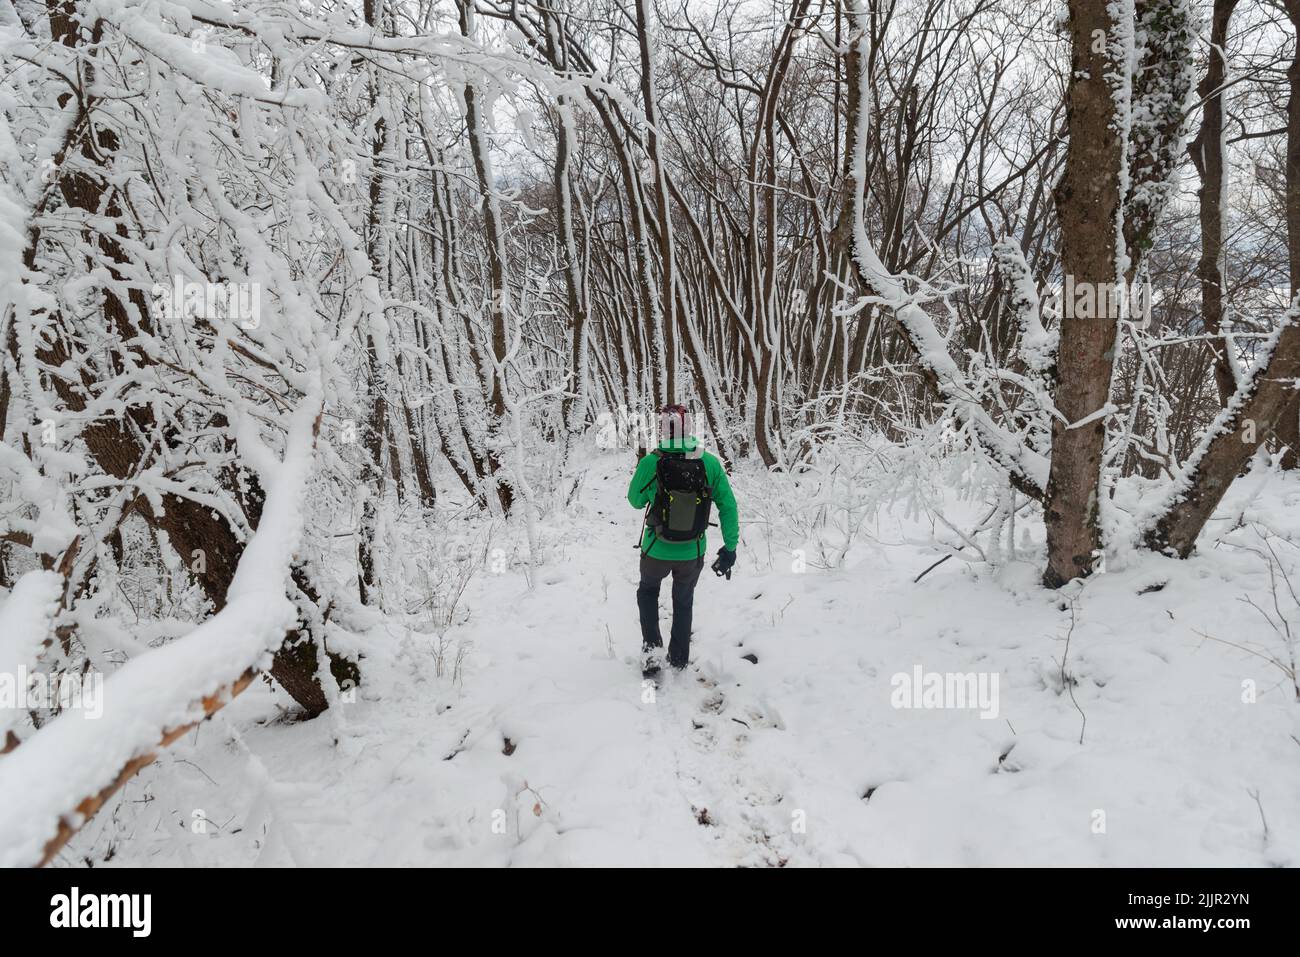 A man with hiking outfit walking in the snowy woods Stock Photo